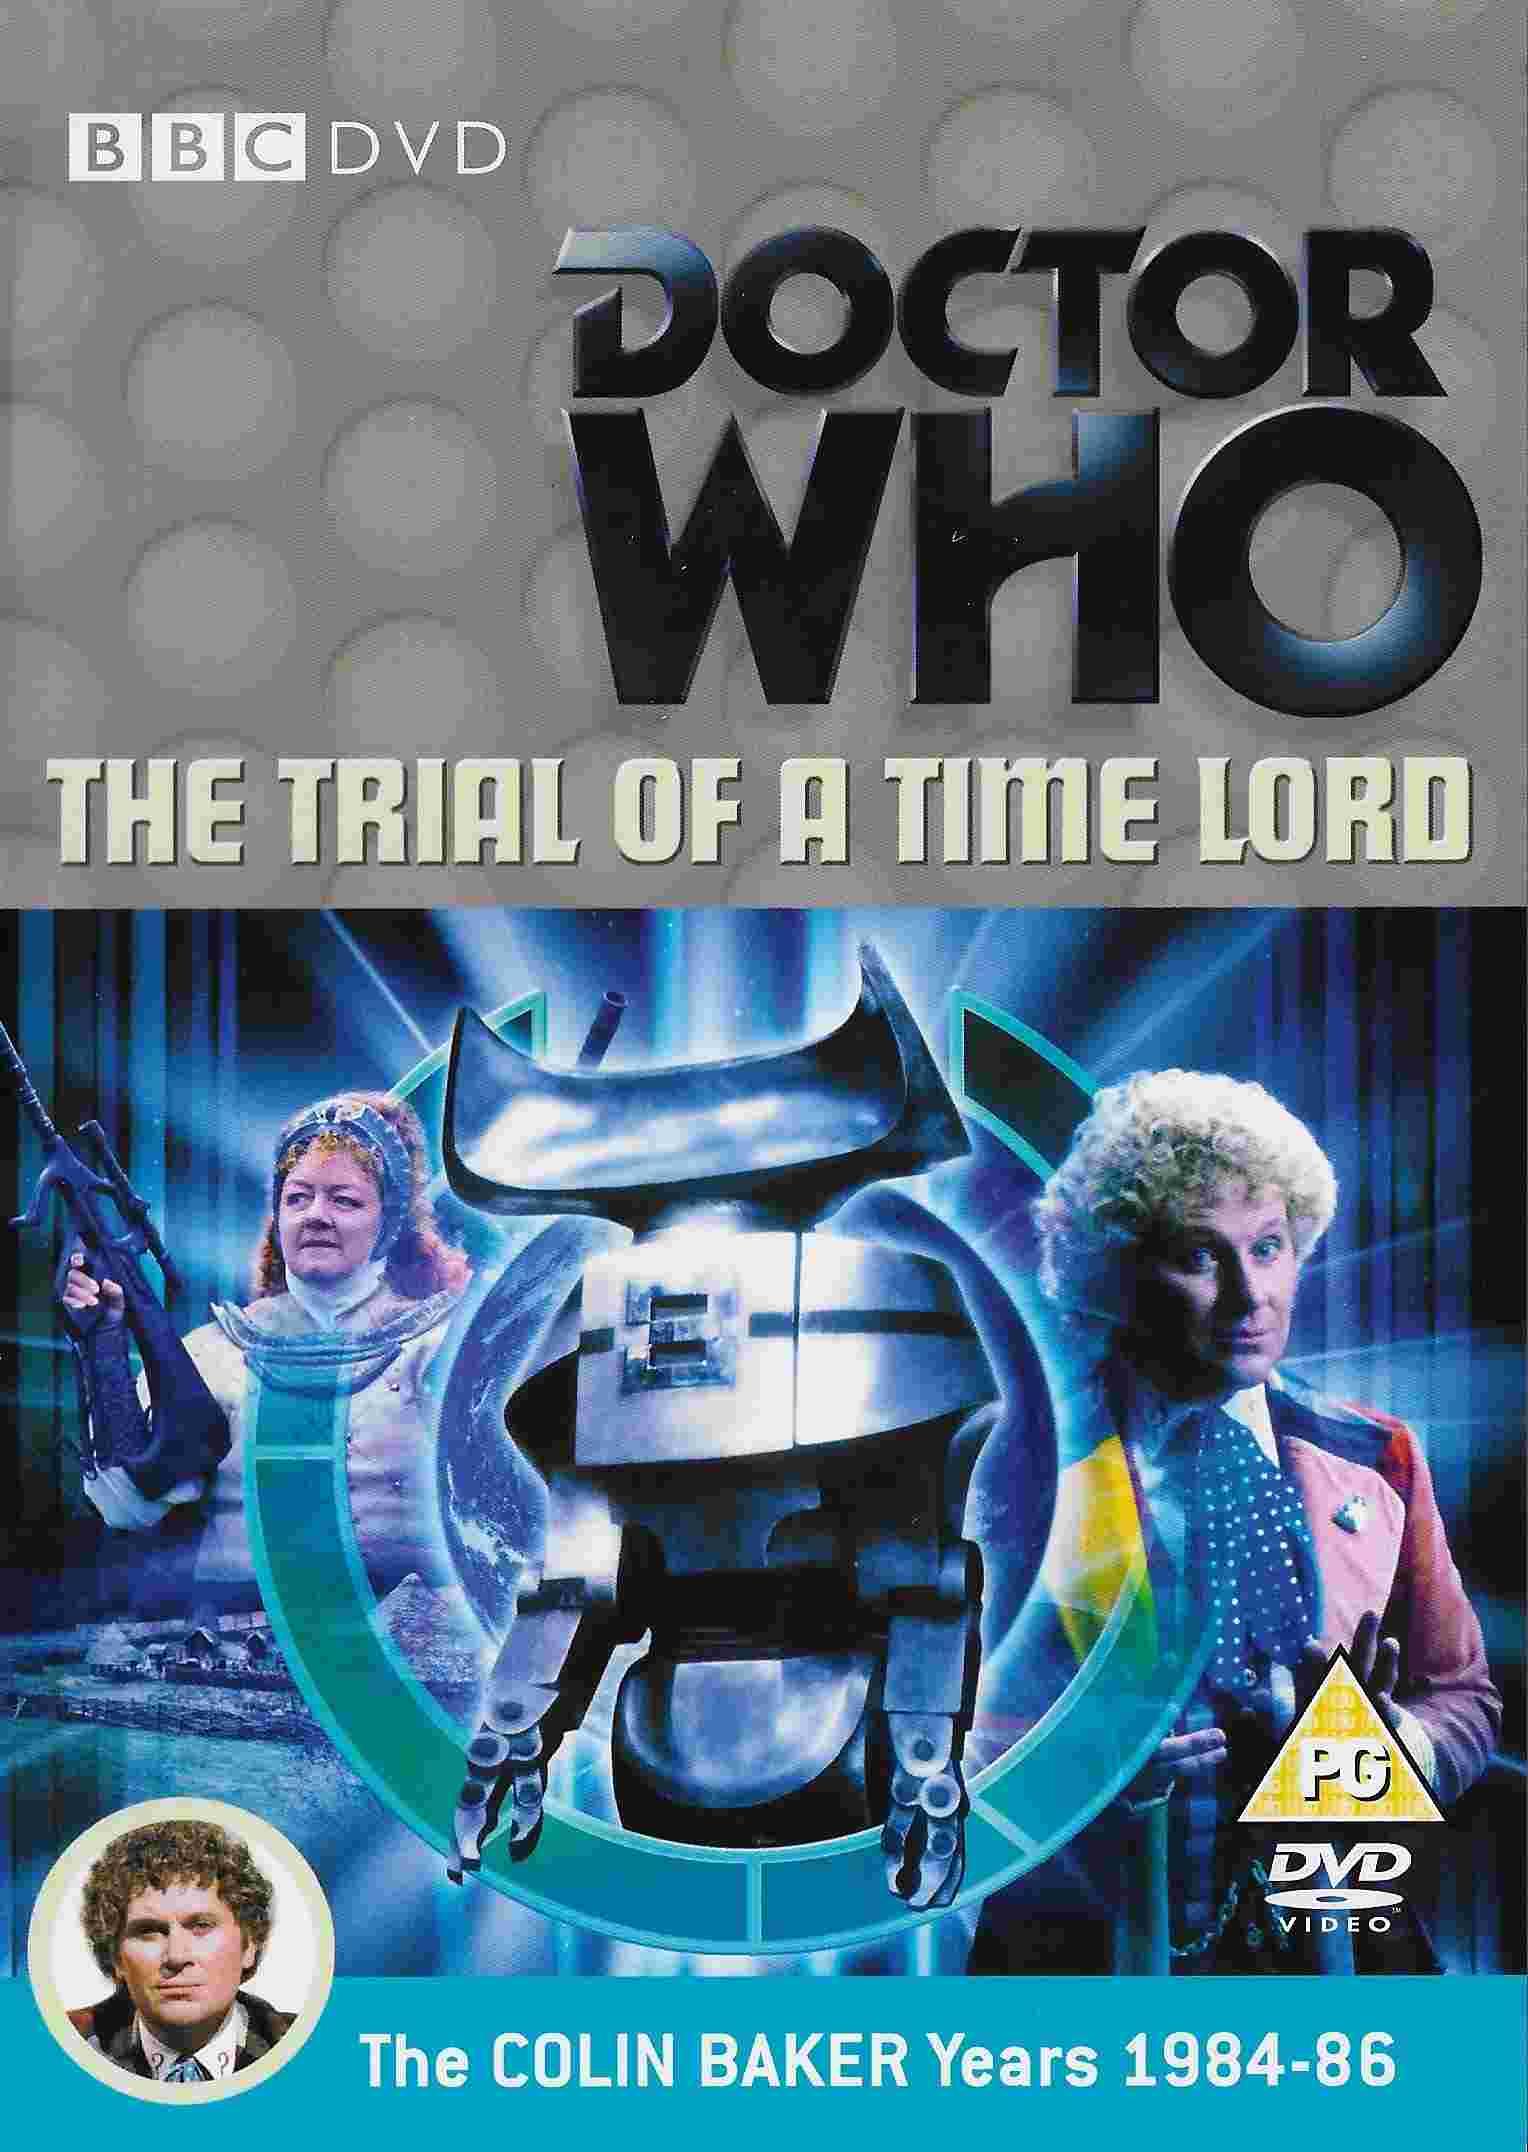 Picture of BBCDVD 2422A Doctor Who - The trial of a Time Lord - Parts 1-4 - The mysterious planet by artist Robert Holmes from the BBC records and Tapes library